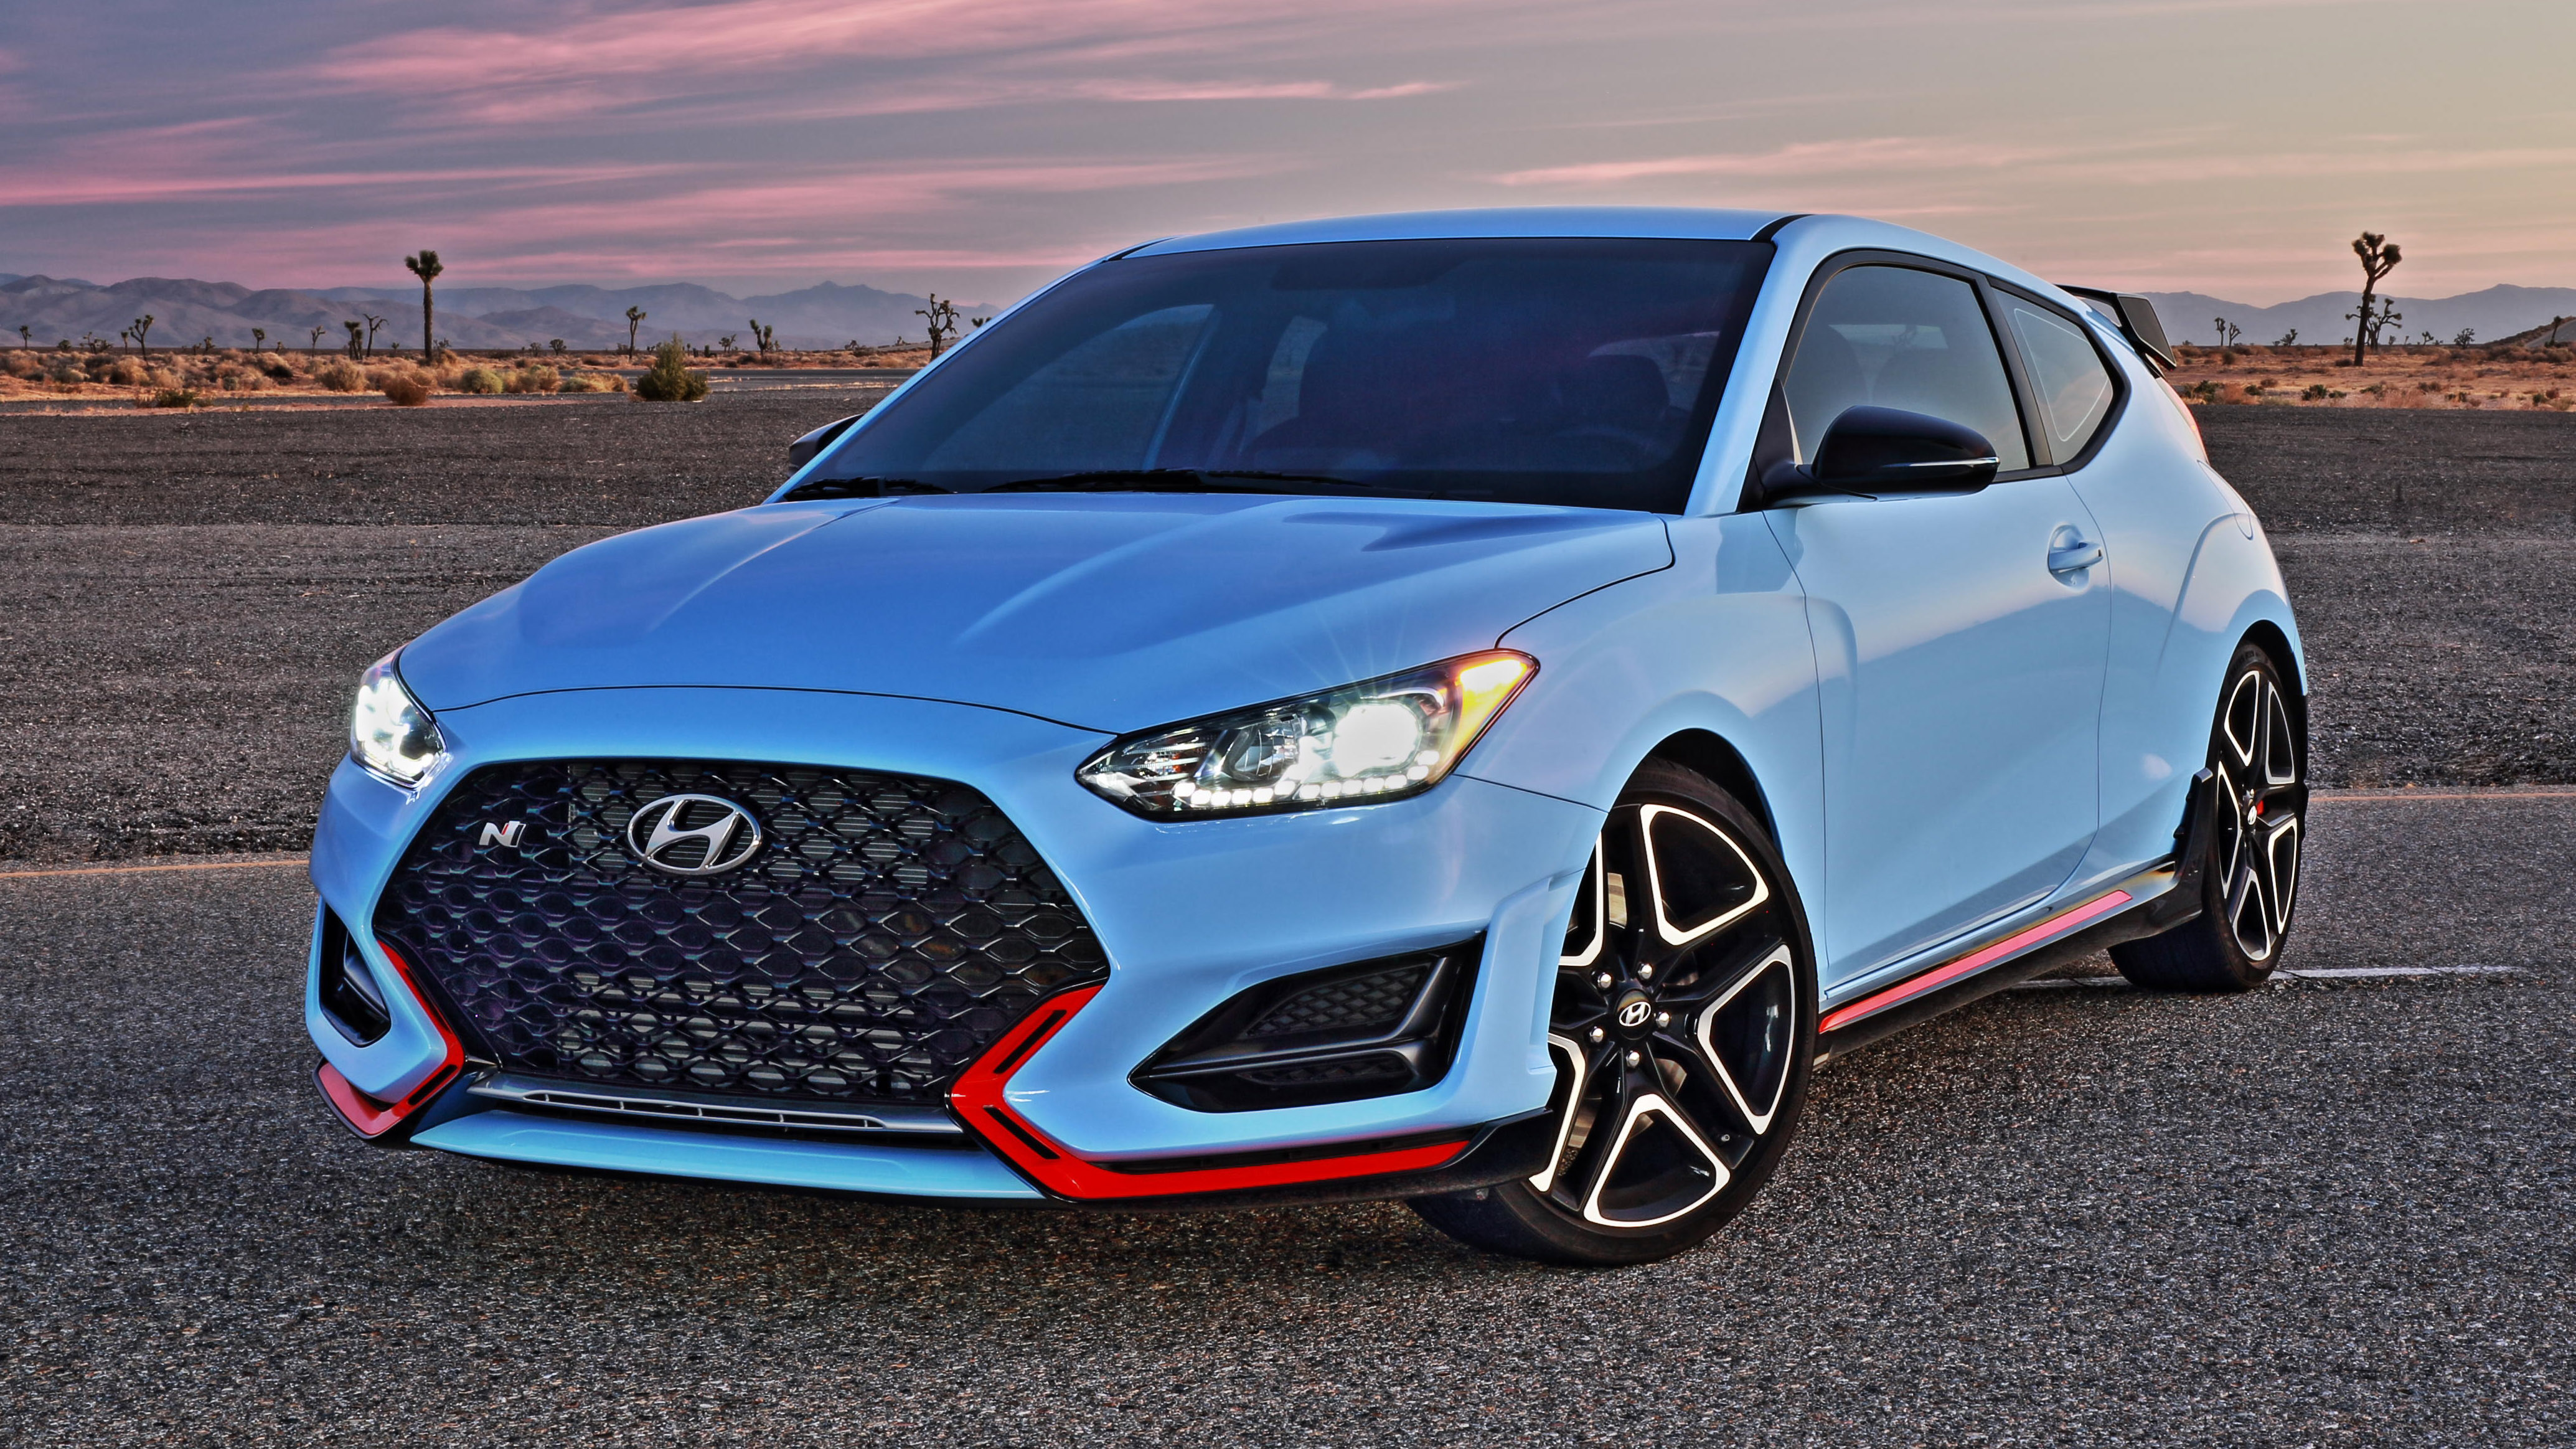 2020 Hyundai Veloster N Review | Performance, handling, practicality |  Autoblog